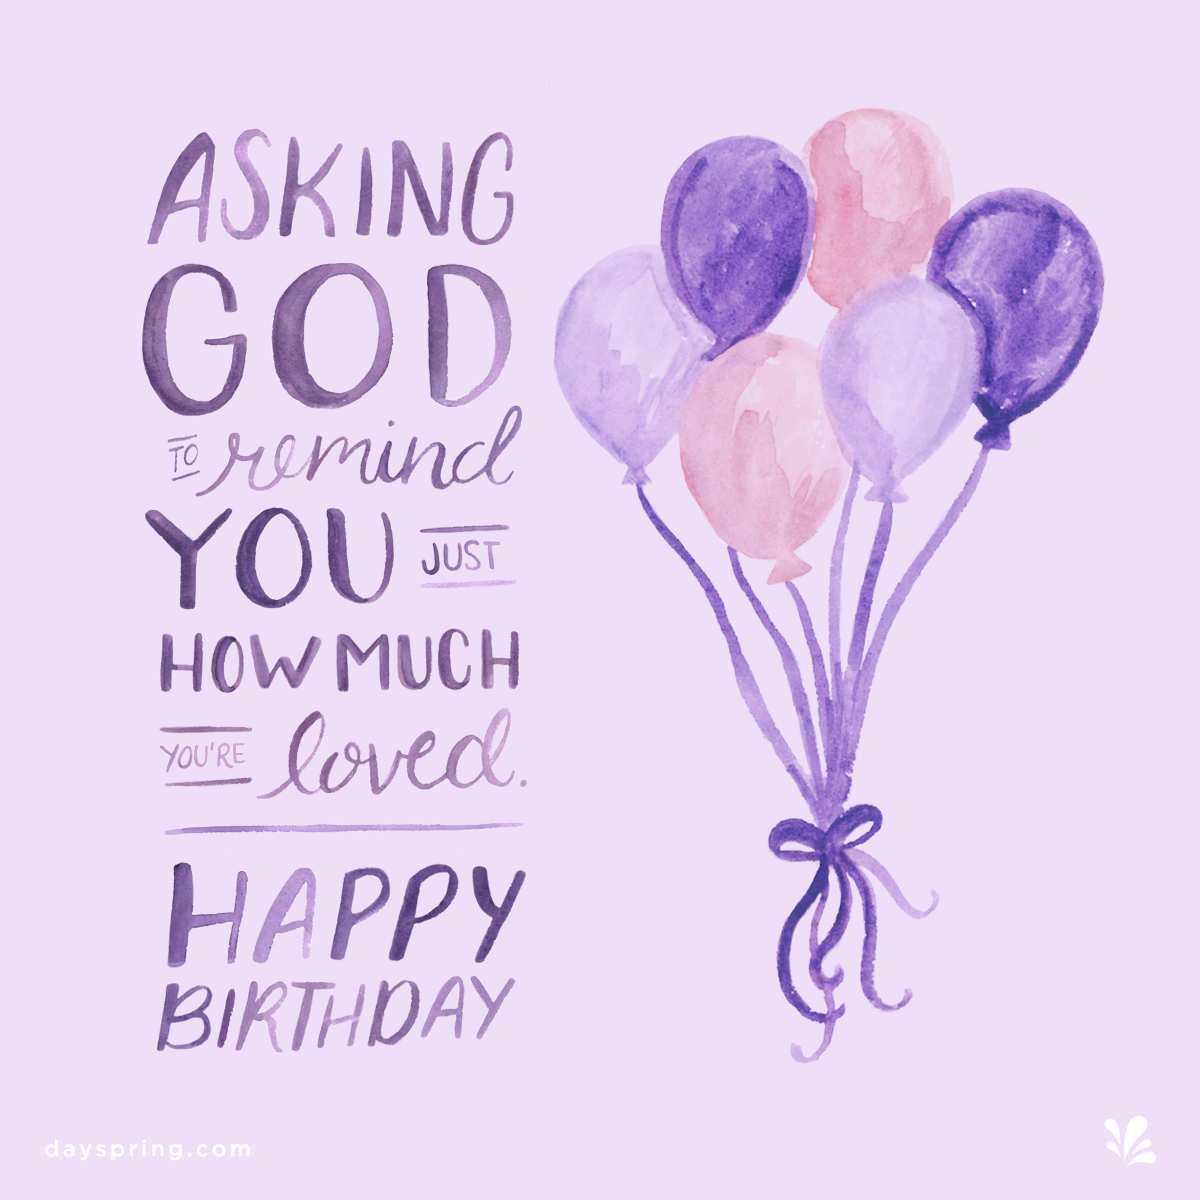 Free Religious Birthday Card Templates - Cards Design Templates Inside Christian Business Cards Templates Free